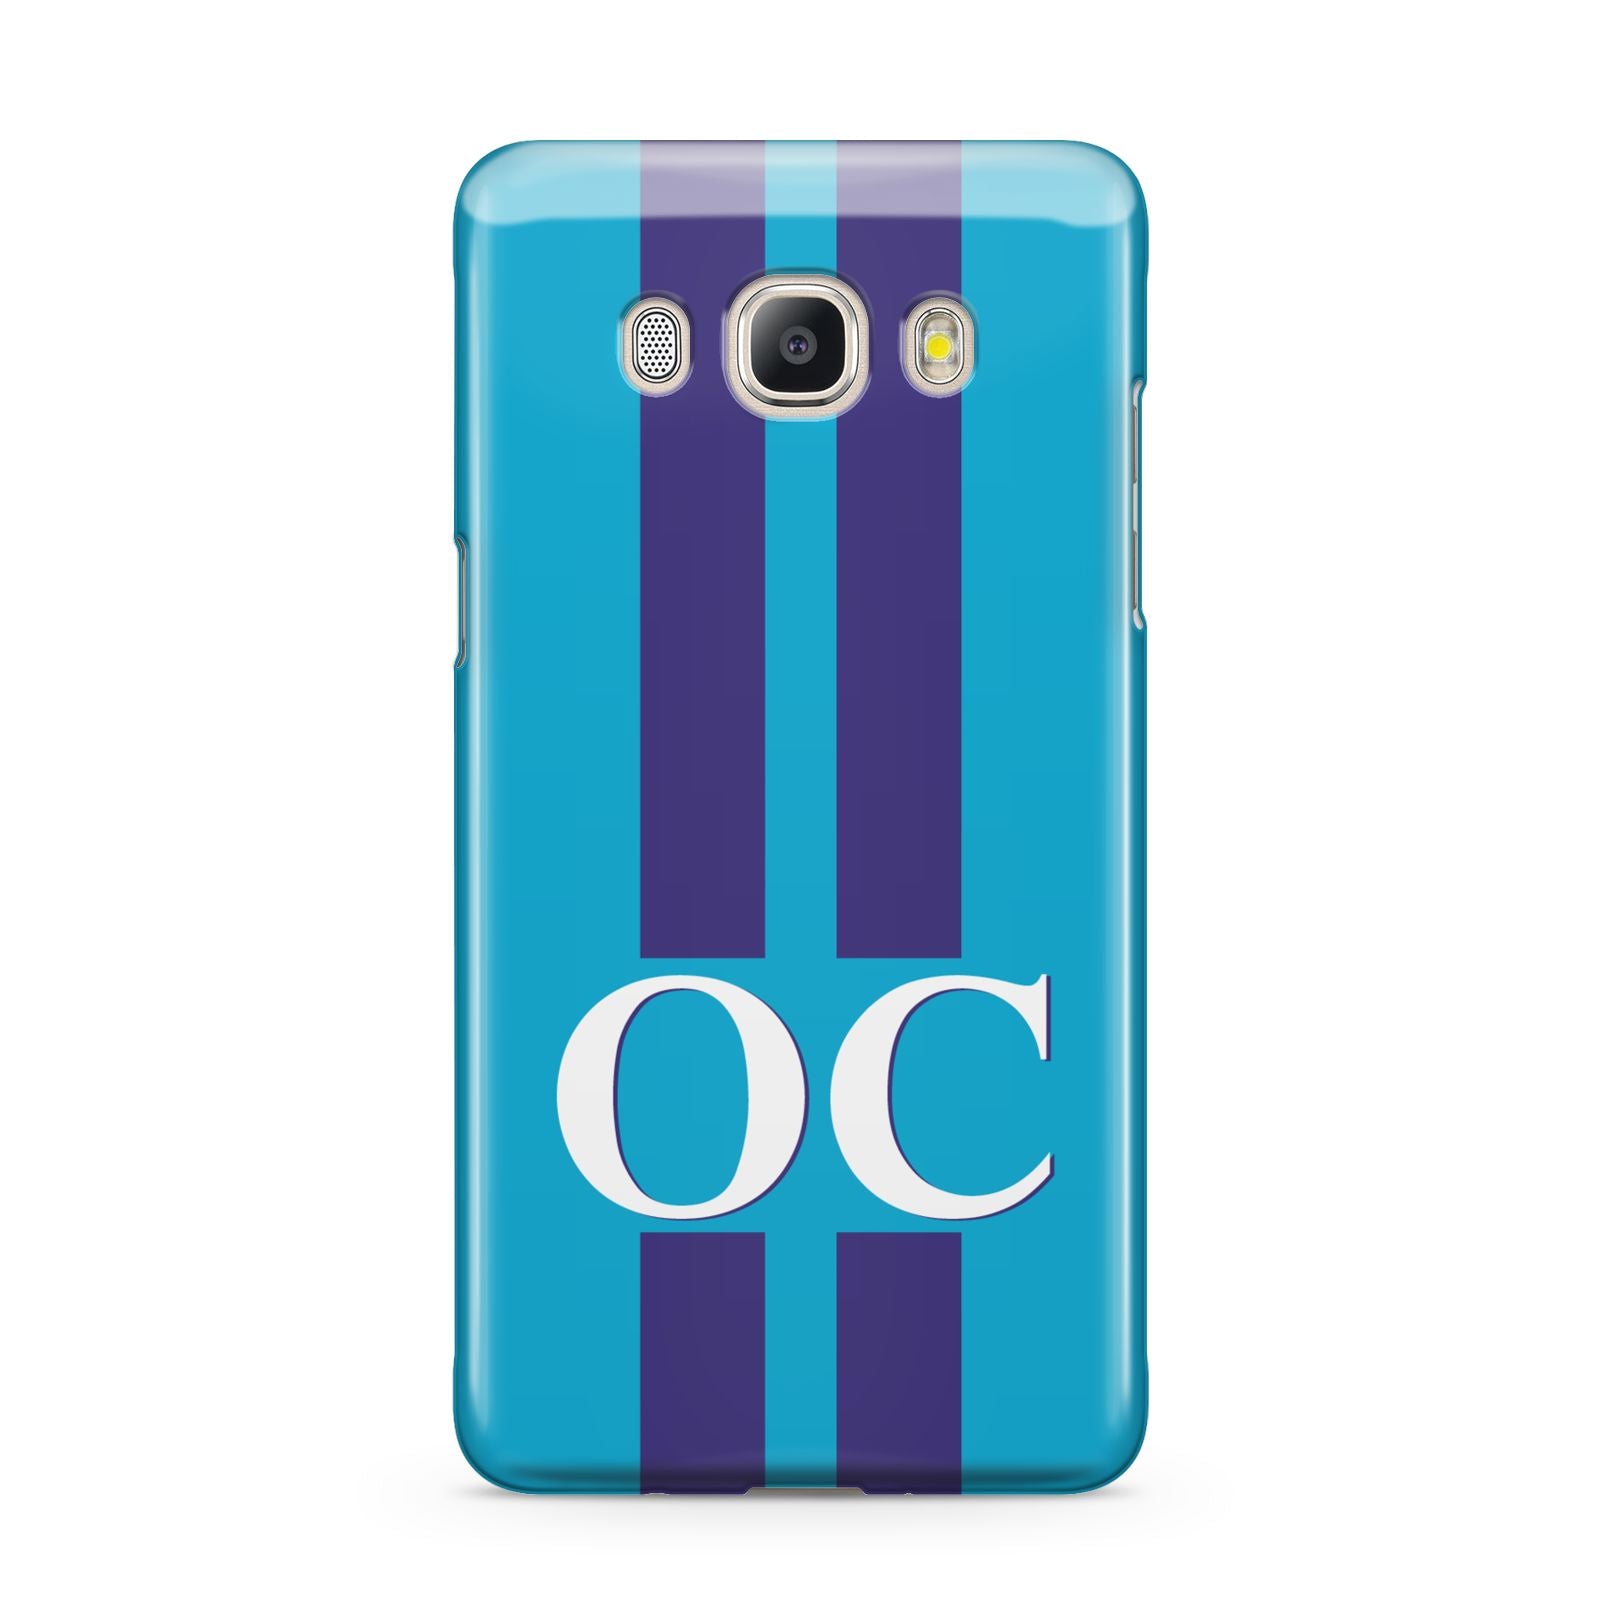 Turquoise Personalised Samsung Galaxy J5 2016 Case